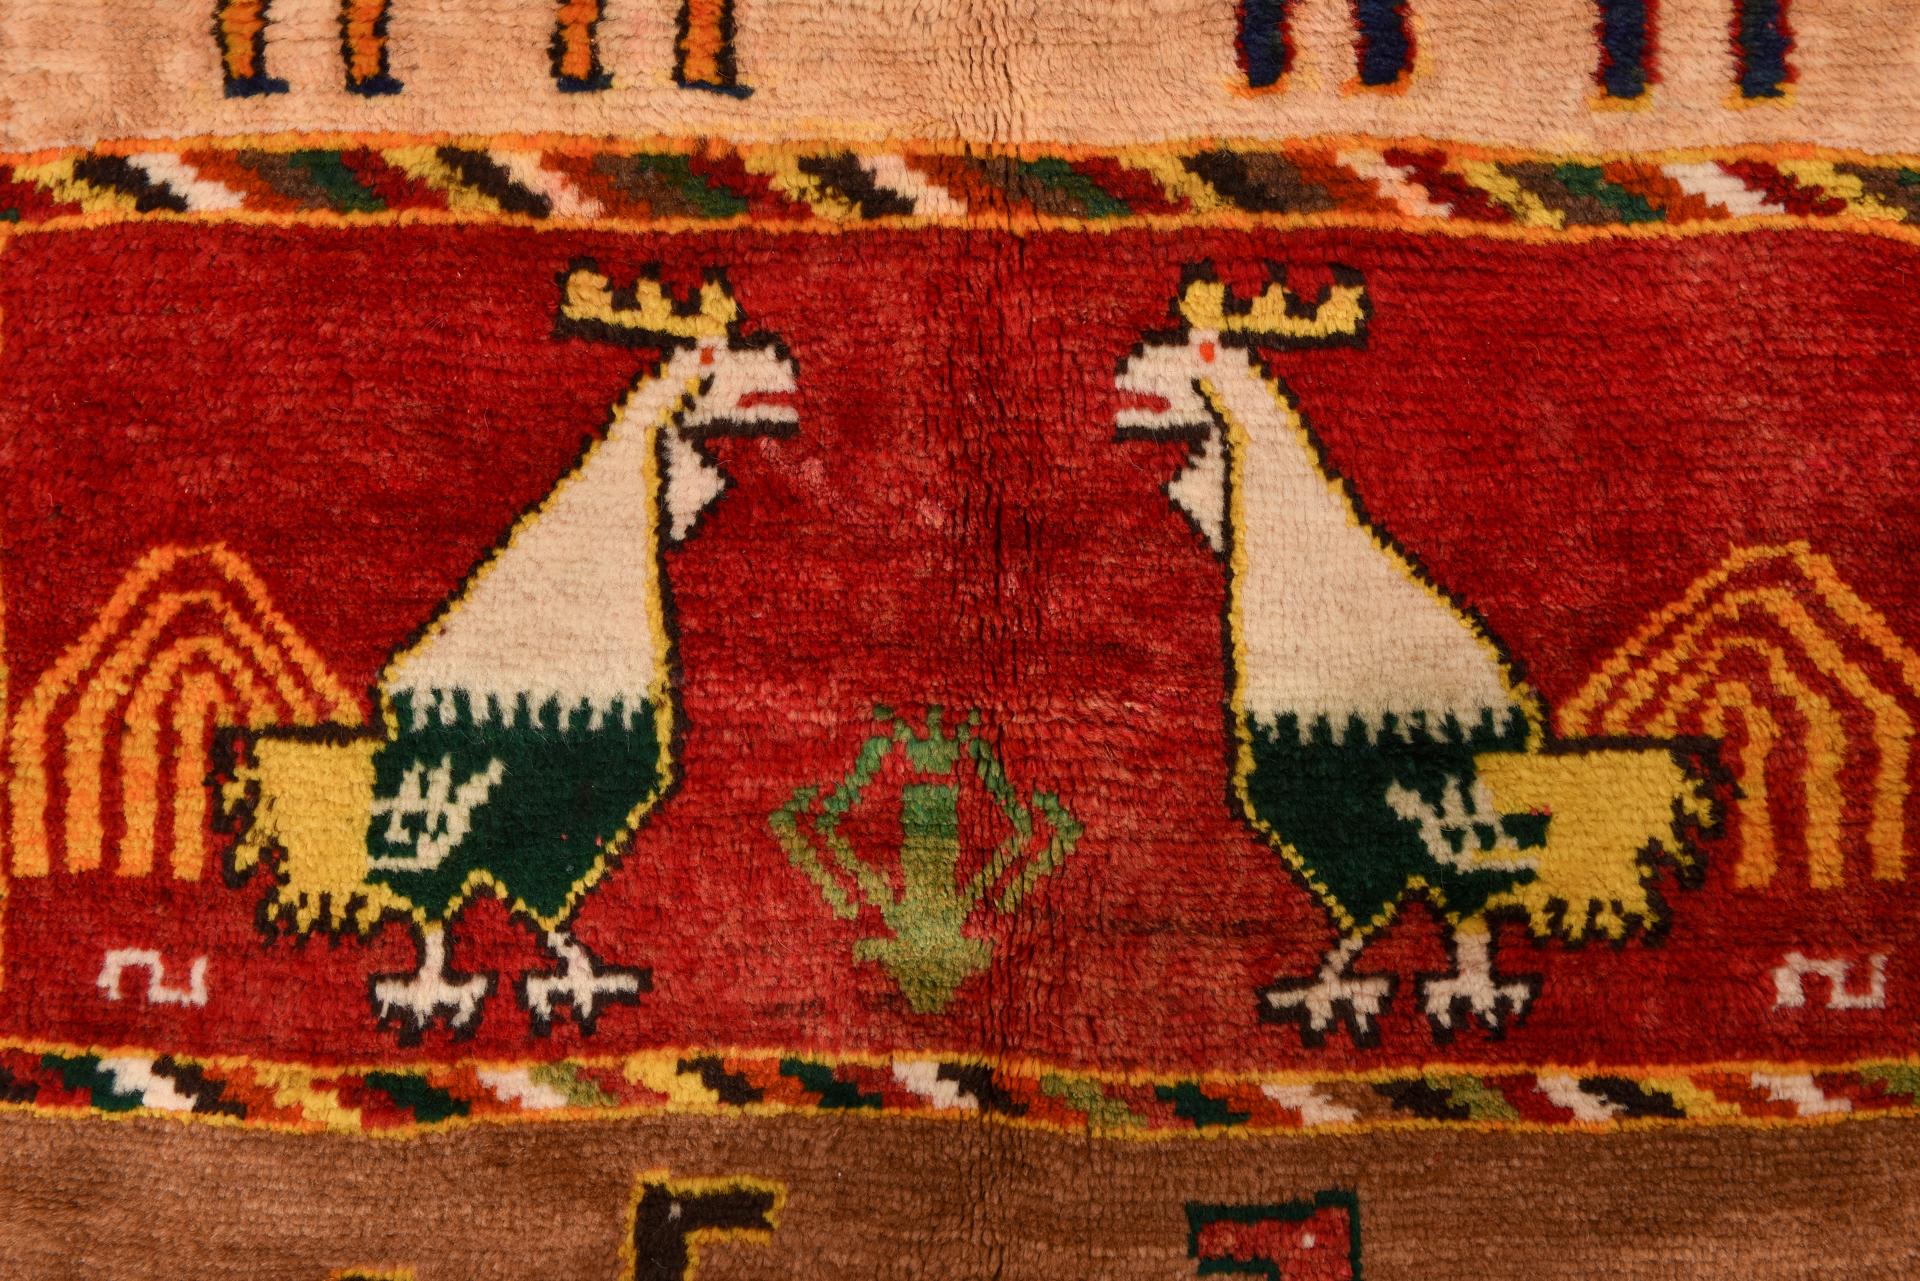 Hand-Knotted Nomadic Rug with Camels and Roosters from My Private Collection For Sale